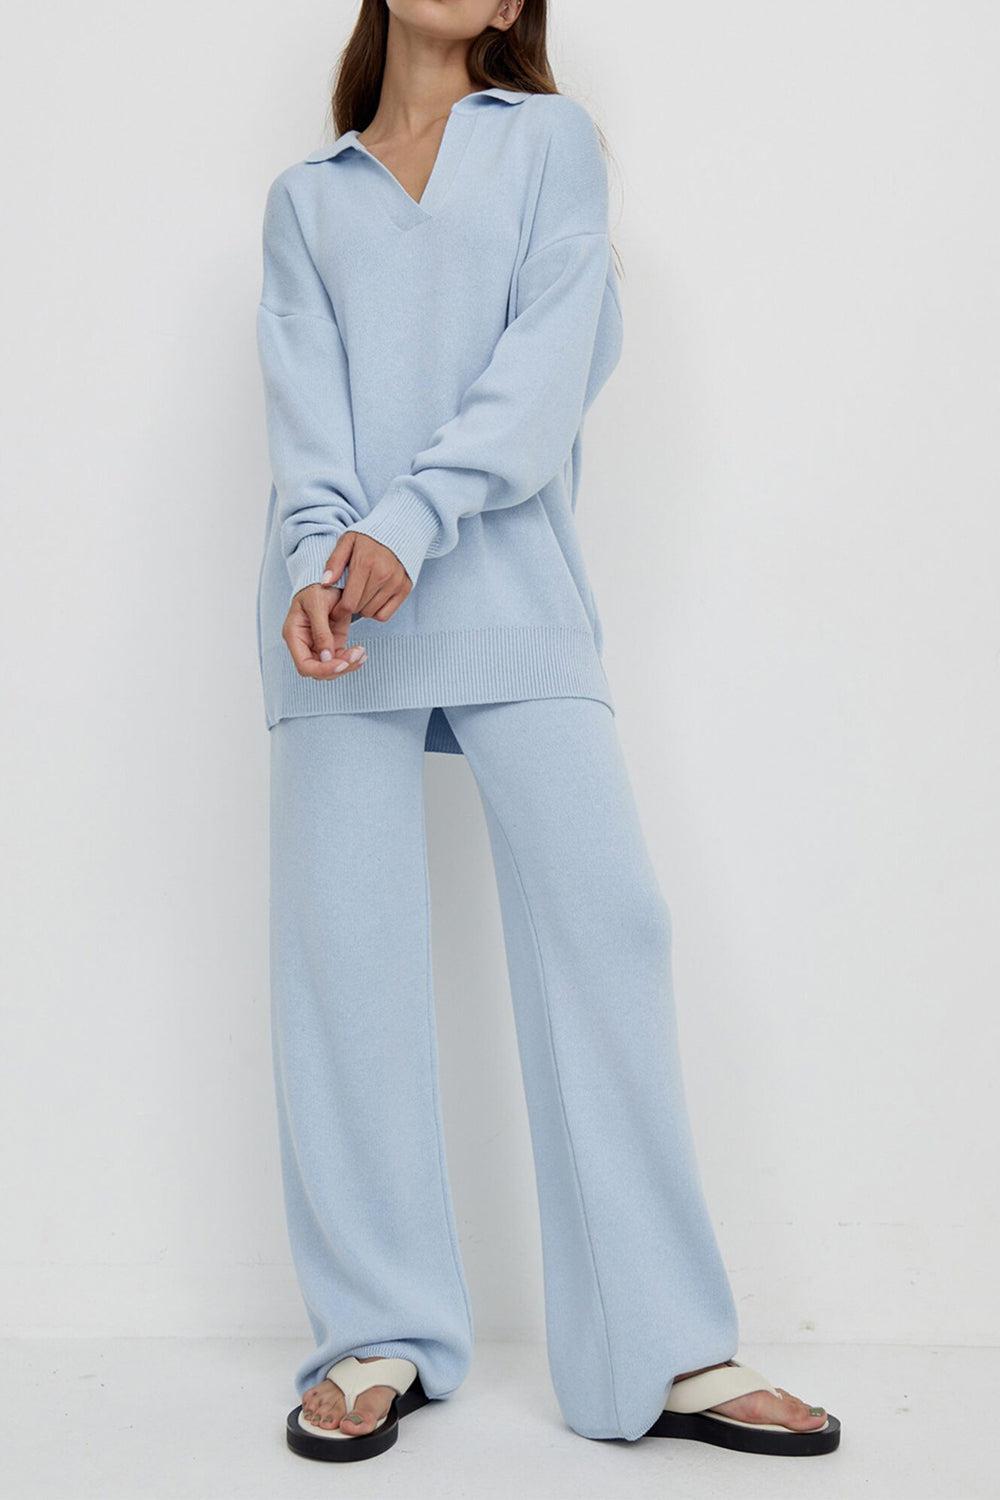 Dropped Shoulder Sweater and Long Pants Set-Set-Casual Sets, Comfy Set, Lounge Set, Matching Set, Ship From Overseas, Shipping Delay 09/29/2023 - 10/03/2023, X.L.J-Misty Blue-One Size-[option4]-[option5]-[option6]-Womens-USA-Clothing-Boutique-Shop-Online-Clothes Minded